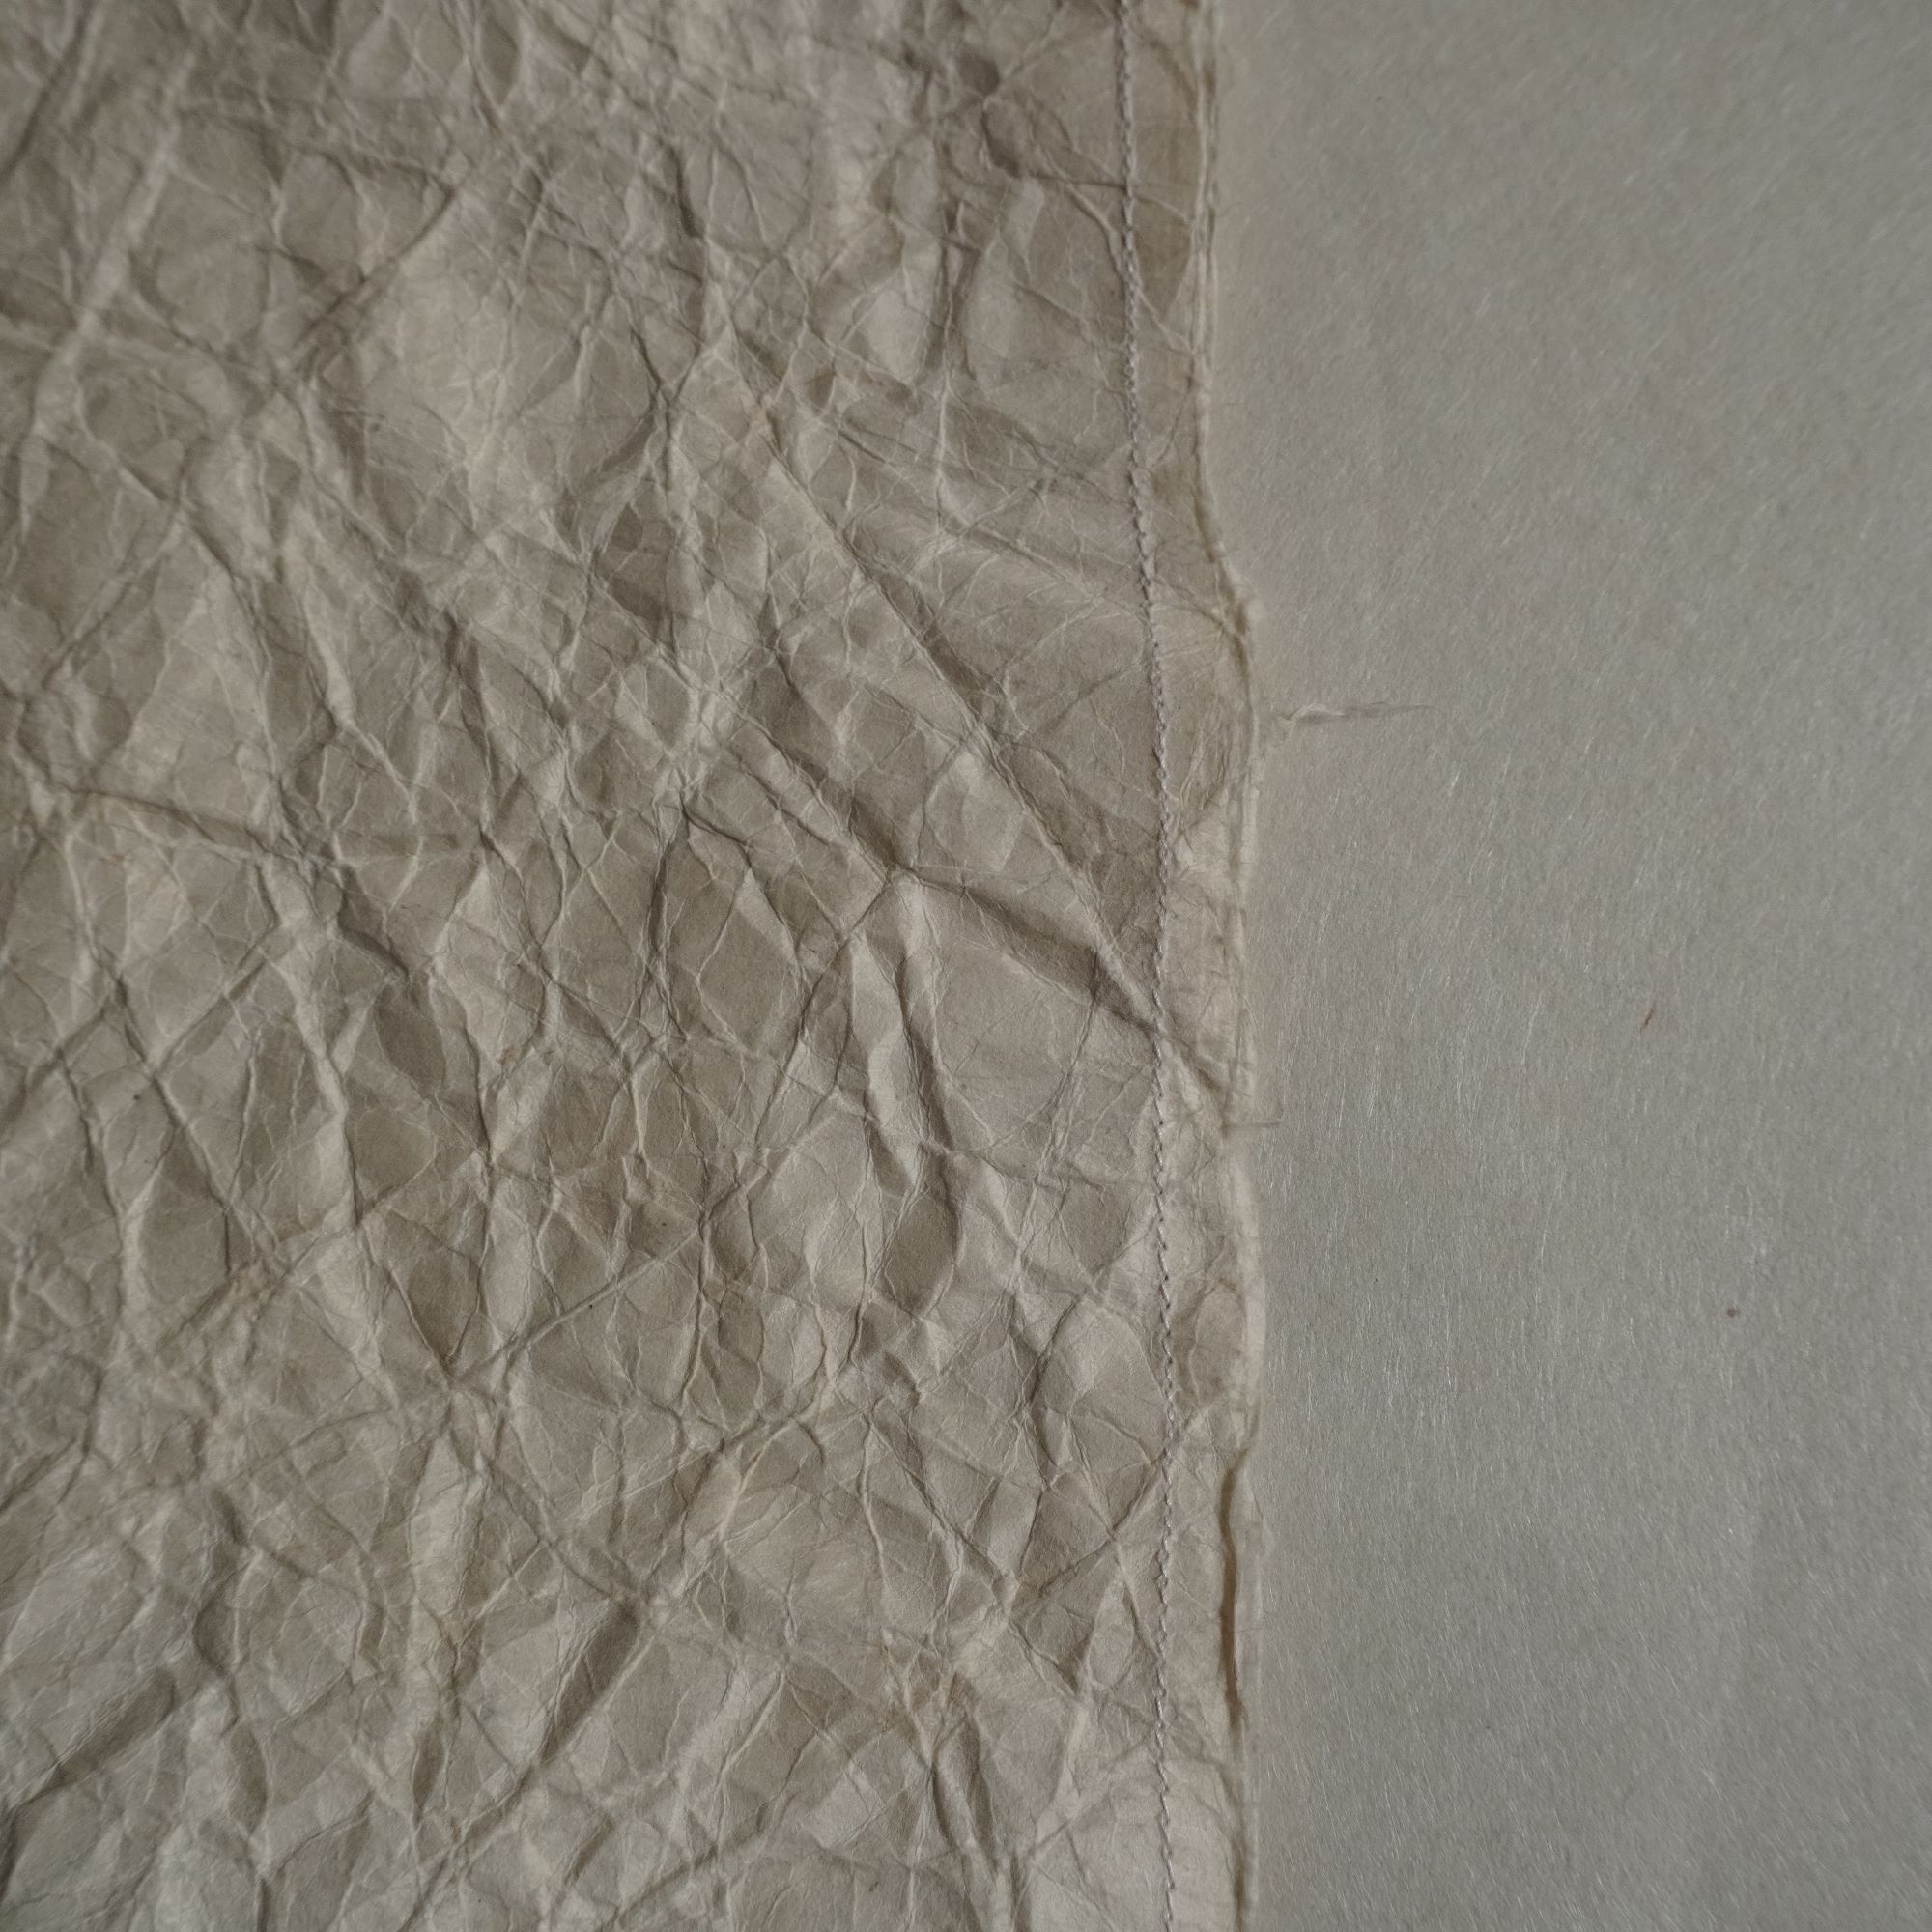 wrinkled by life and plain paper